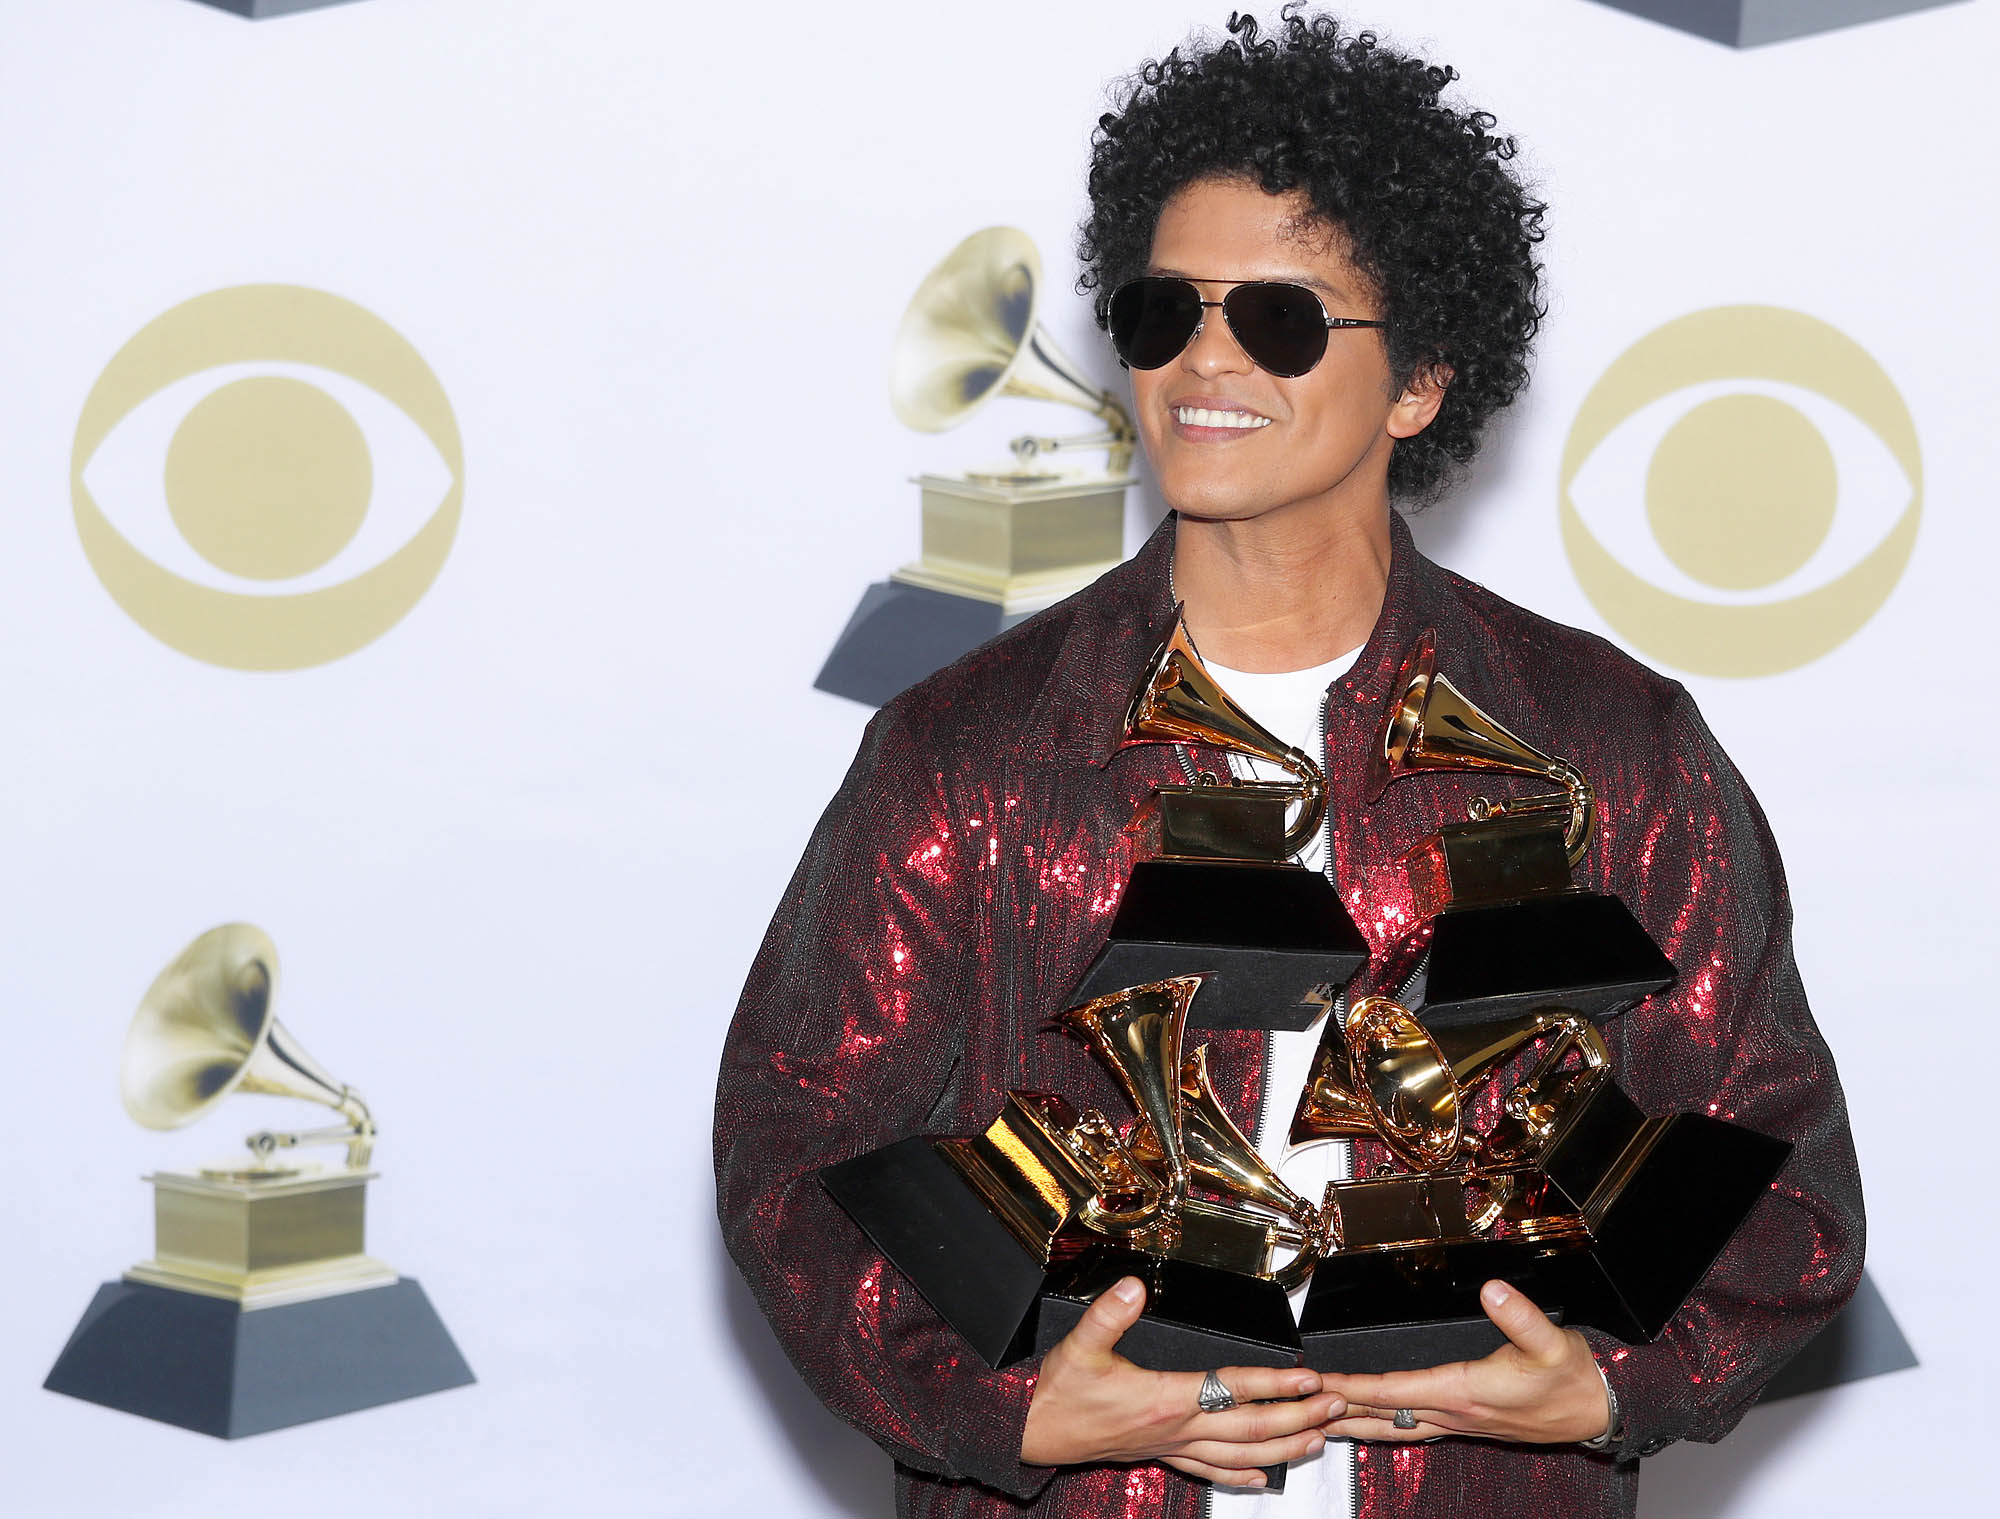 Bruno Mars poses with his six Grammys in the pressroom during the 60th annual Grammy Awards ceremony at Madison Square Garden in New York, New York, USA, 28 January 2018.